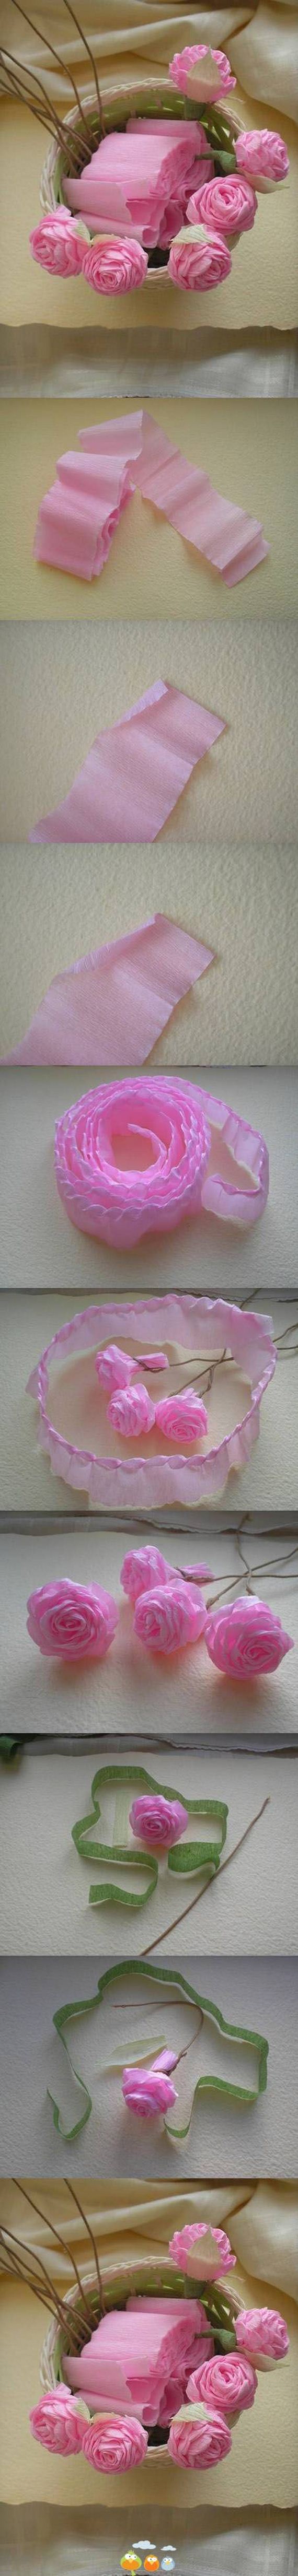 16-Rose-DIY-Projects